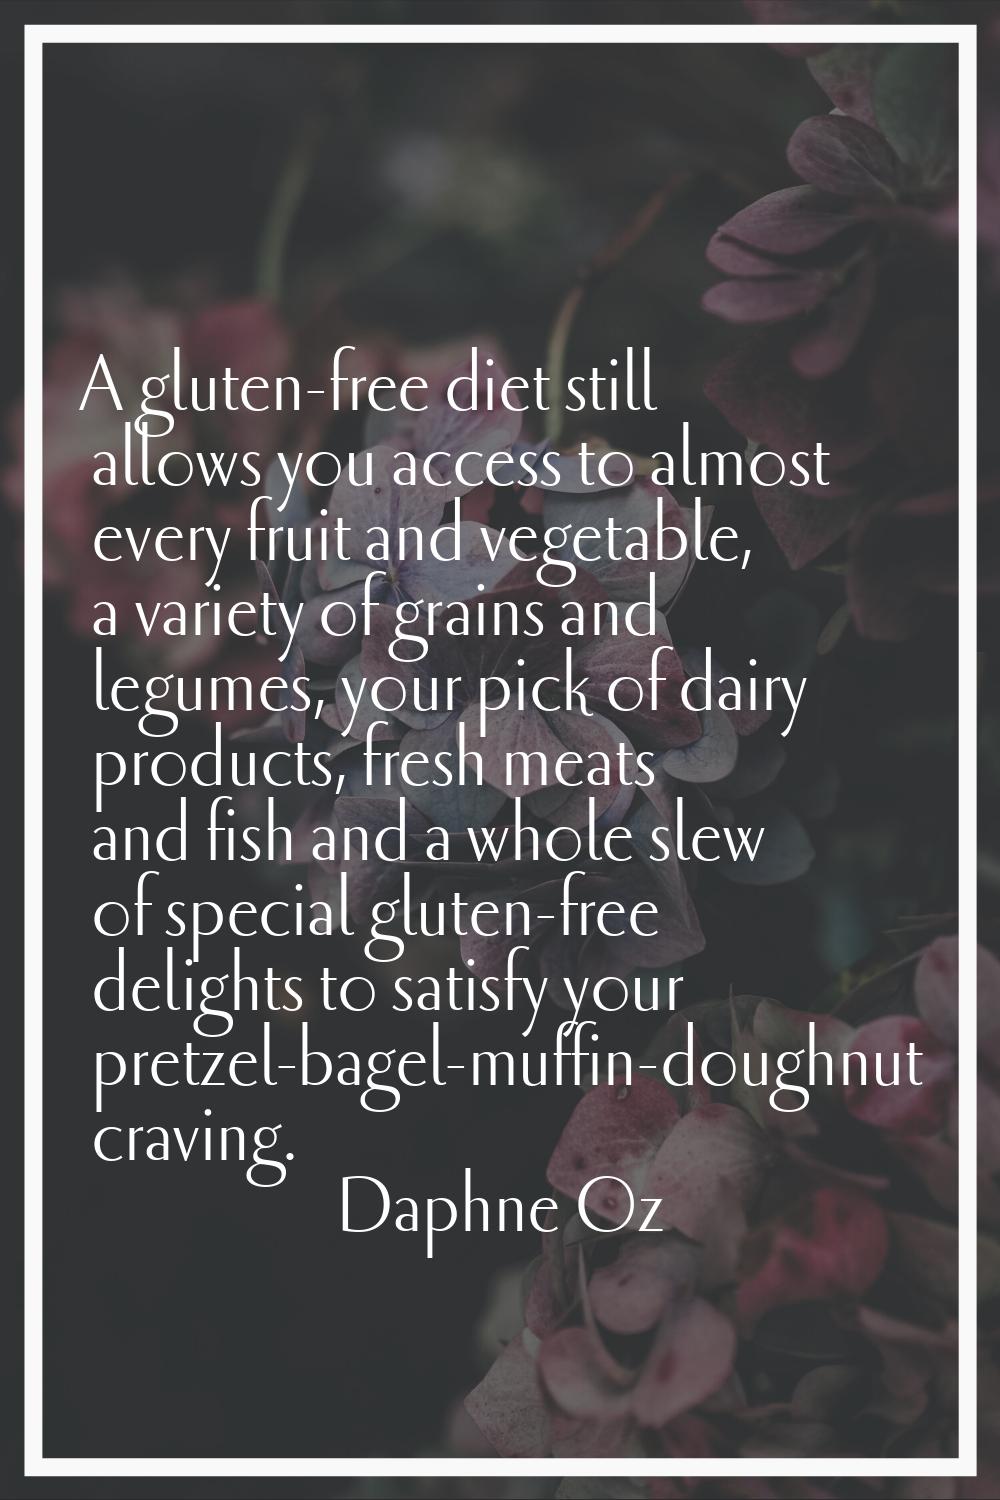 A gluten-free diet still allows you access to almost every fruit and vegetable, a variety of grains